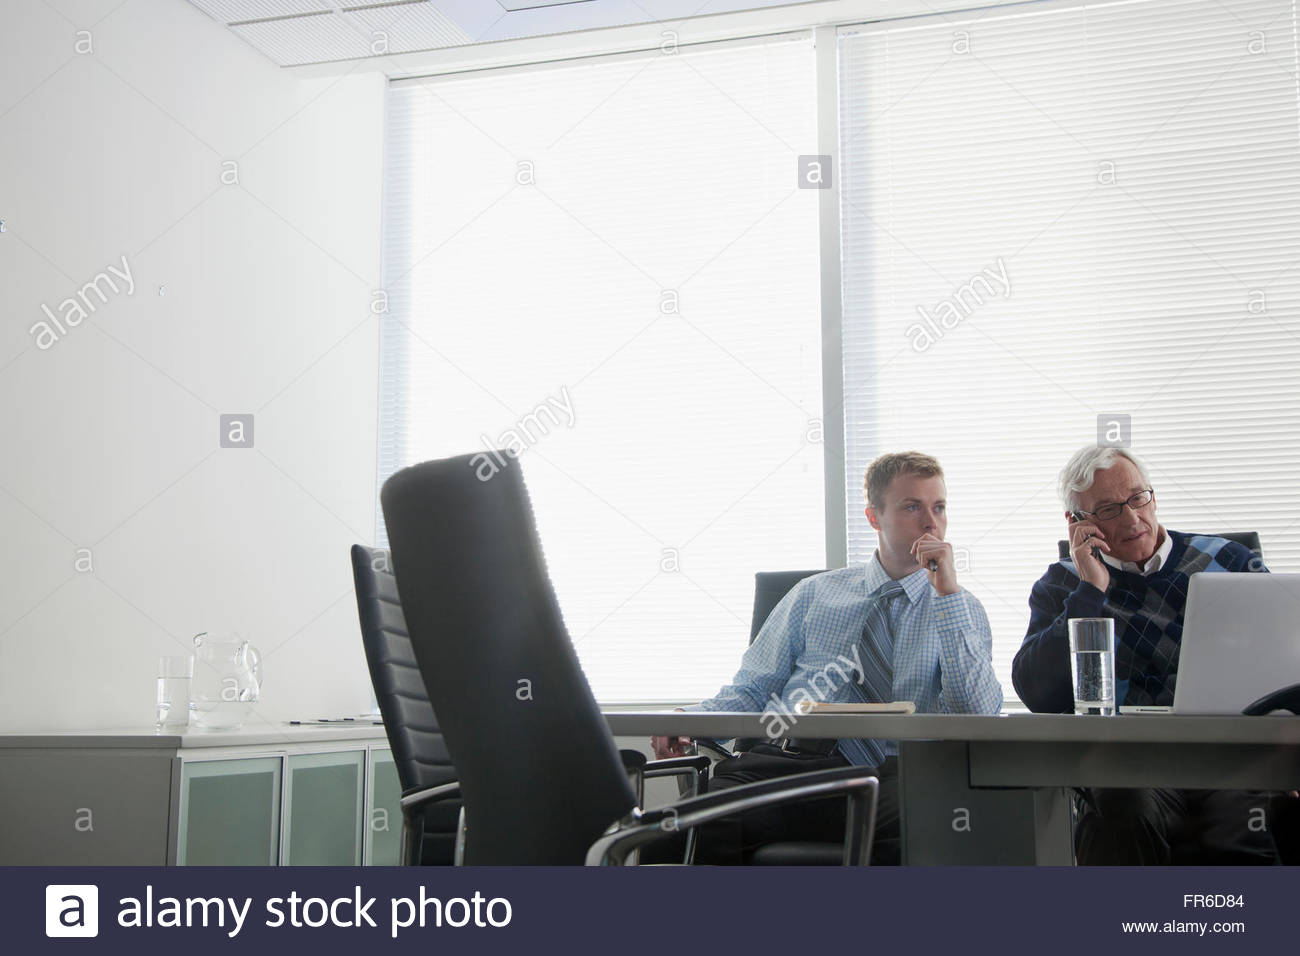 coworkers planning Stock Photo